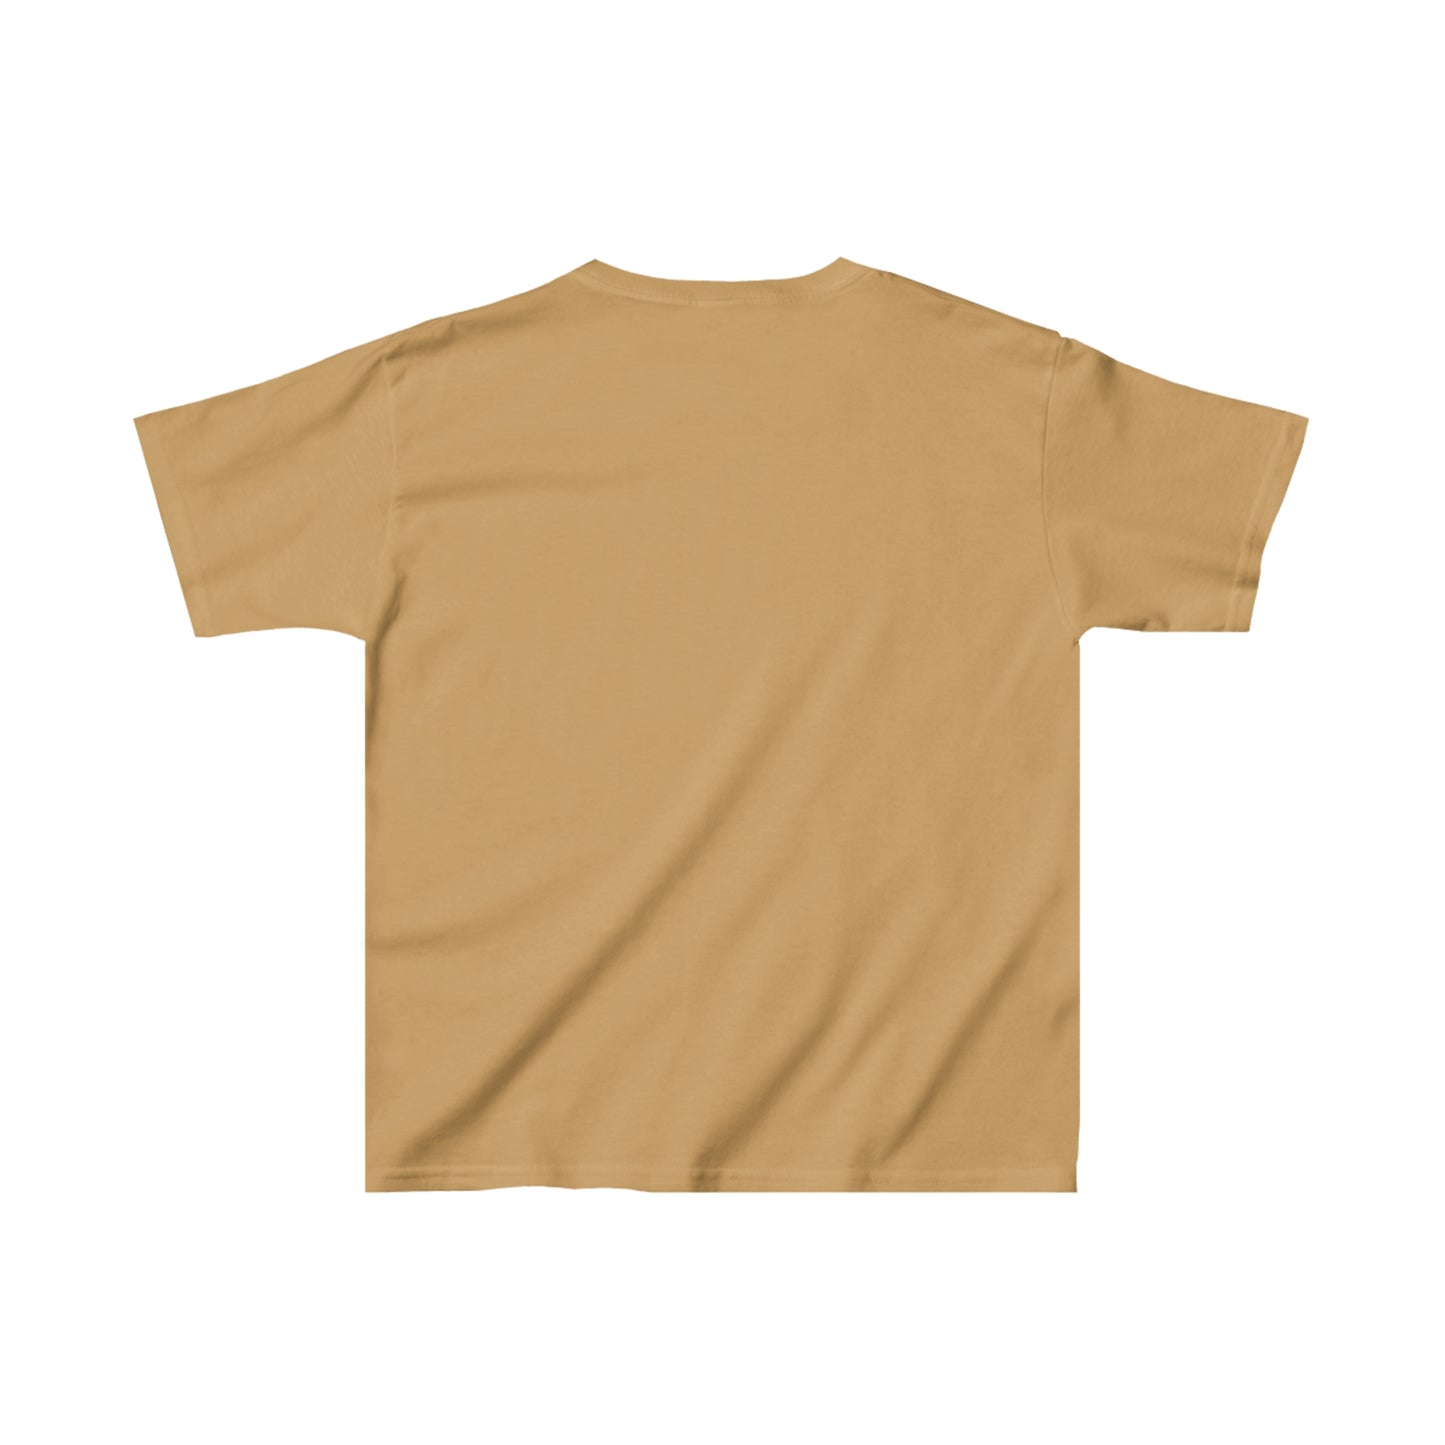 To Do List. Finished. Kids Heavy Cotton™ Tee